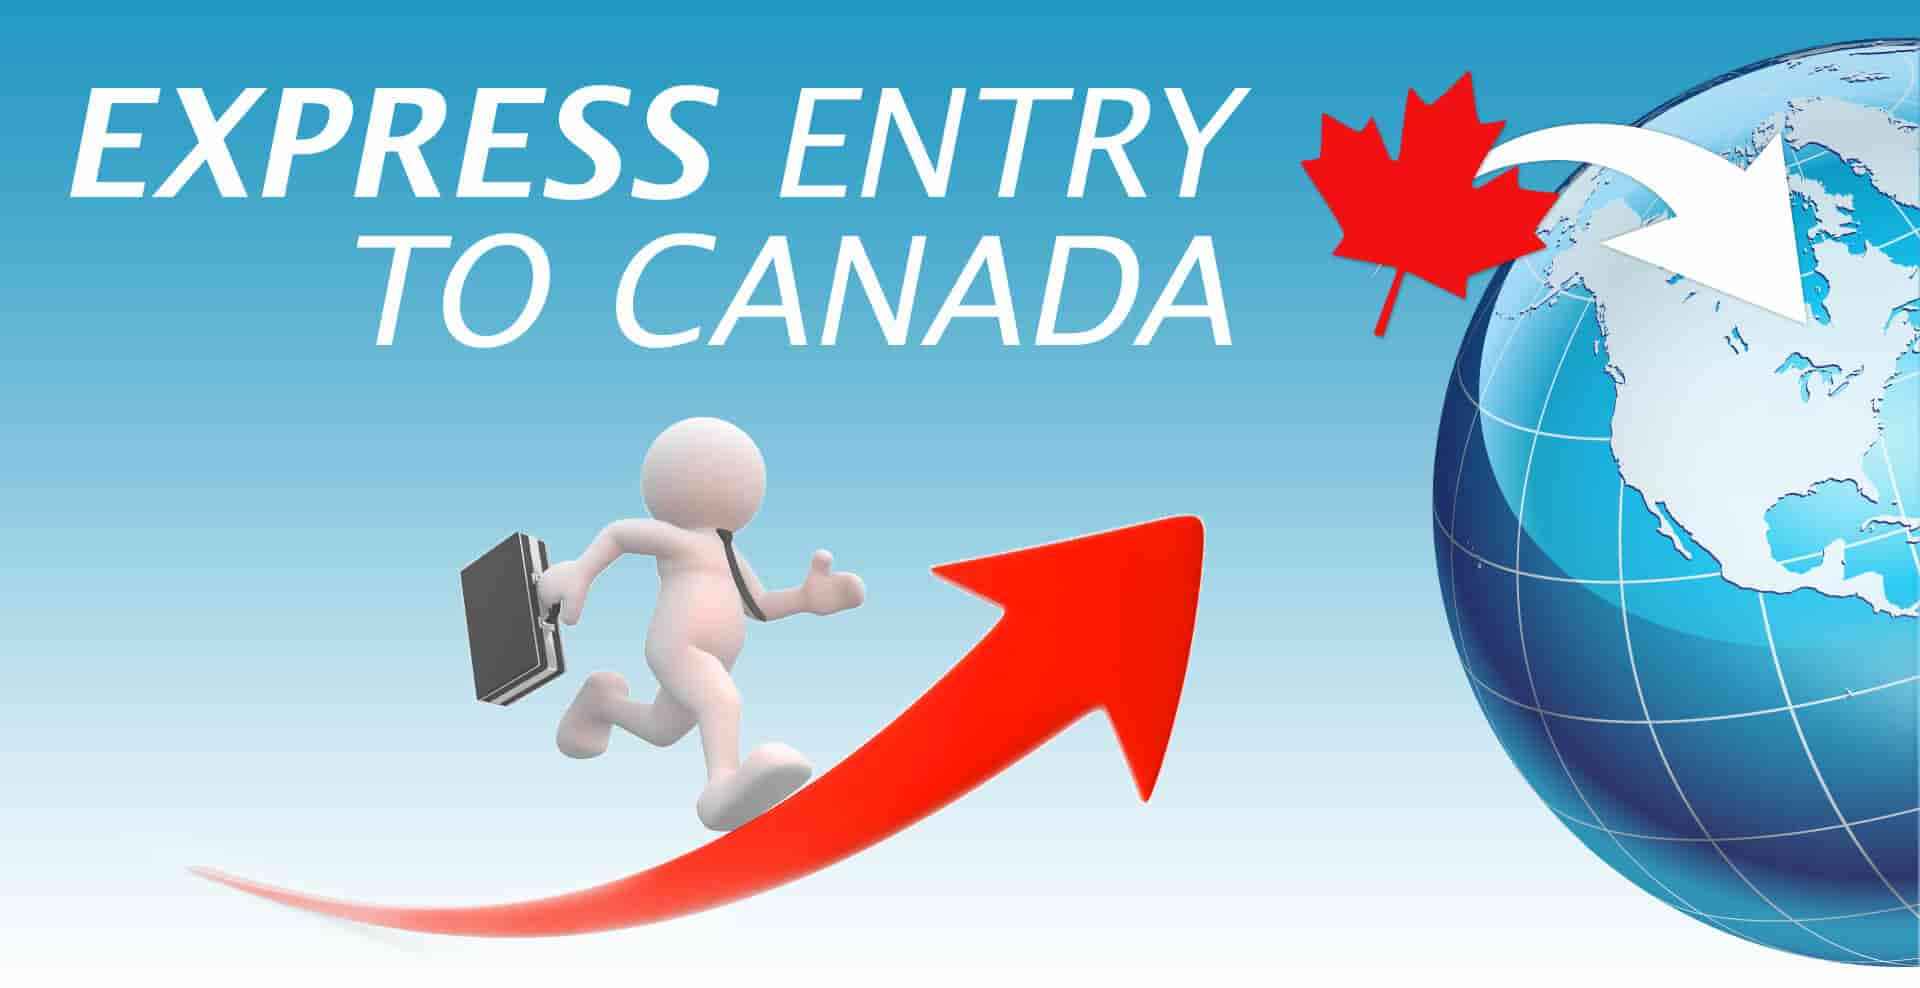 Apply for Permanent Residence through the Canada Express Entry